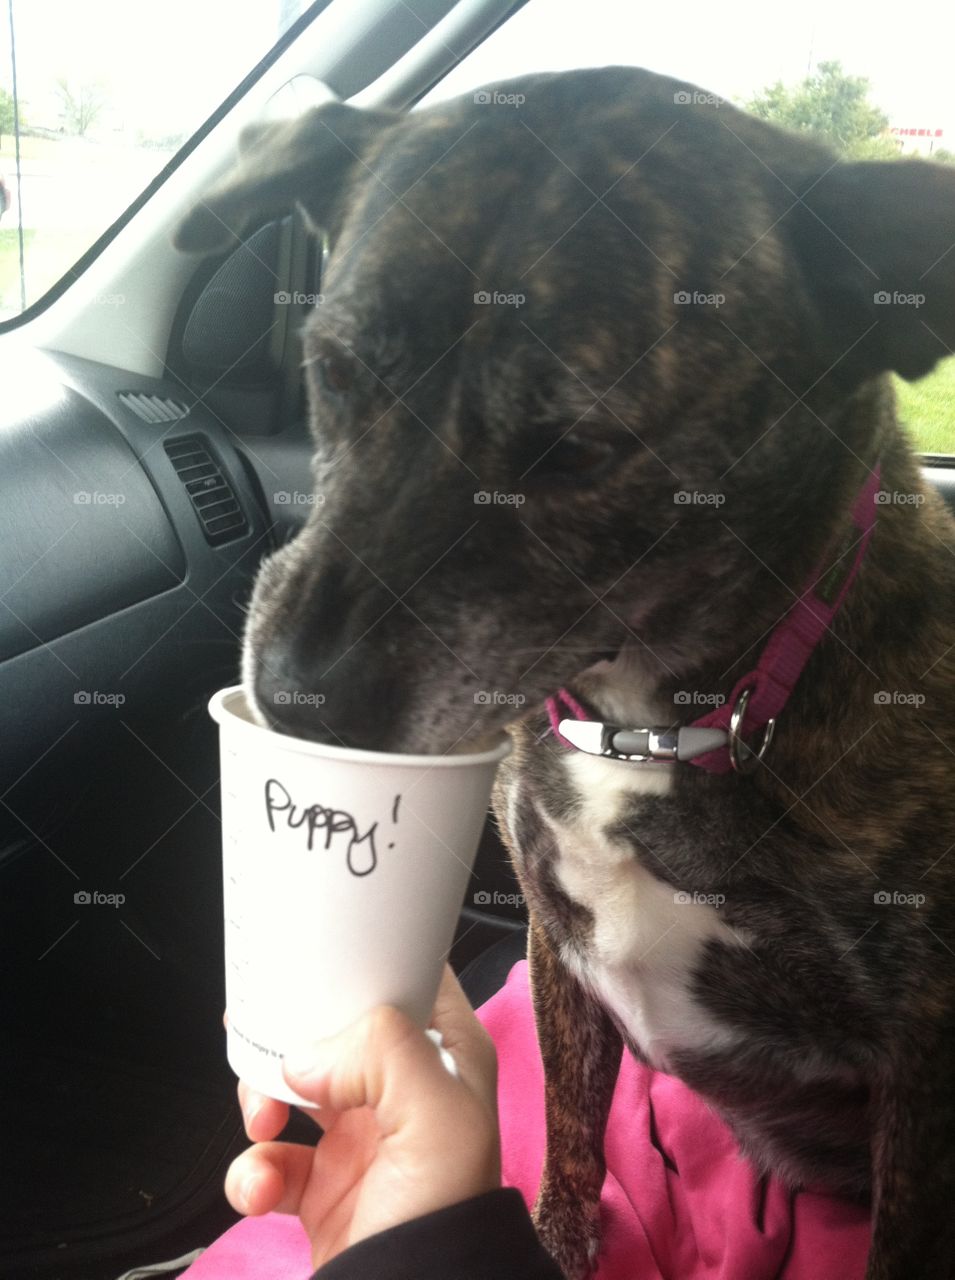 Cute dog enjoying a pup cup, whipped cream, from a local coffee drive through 